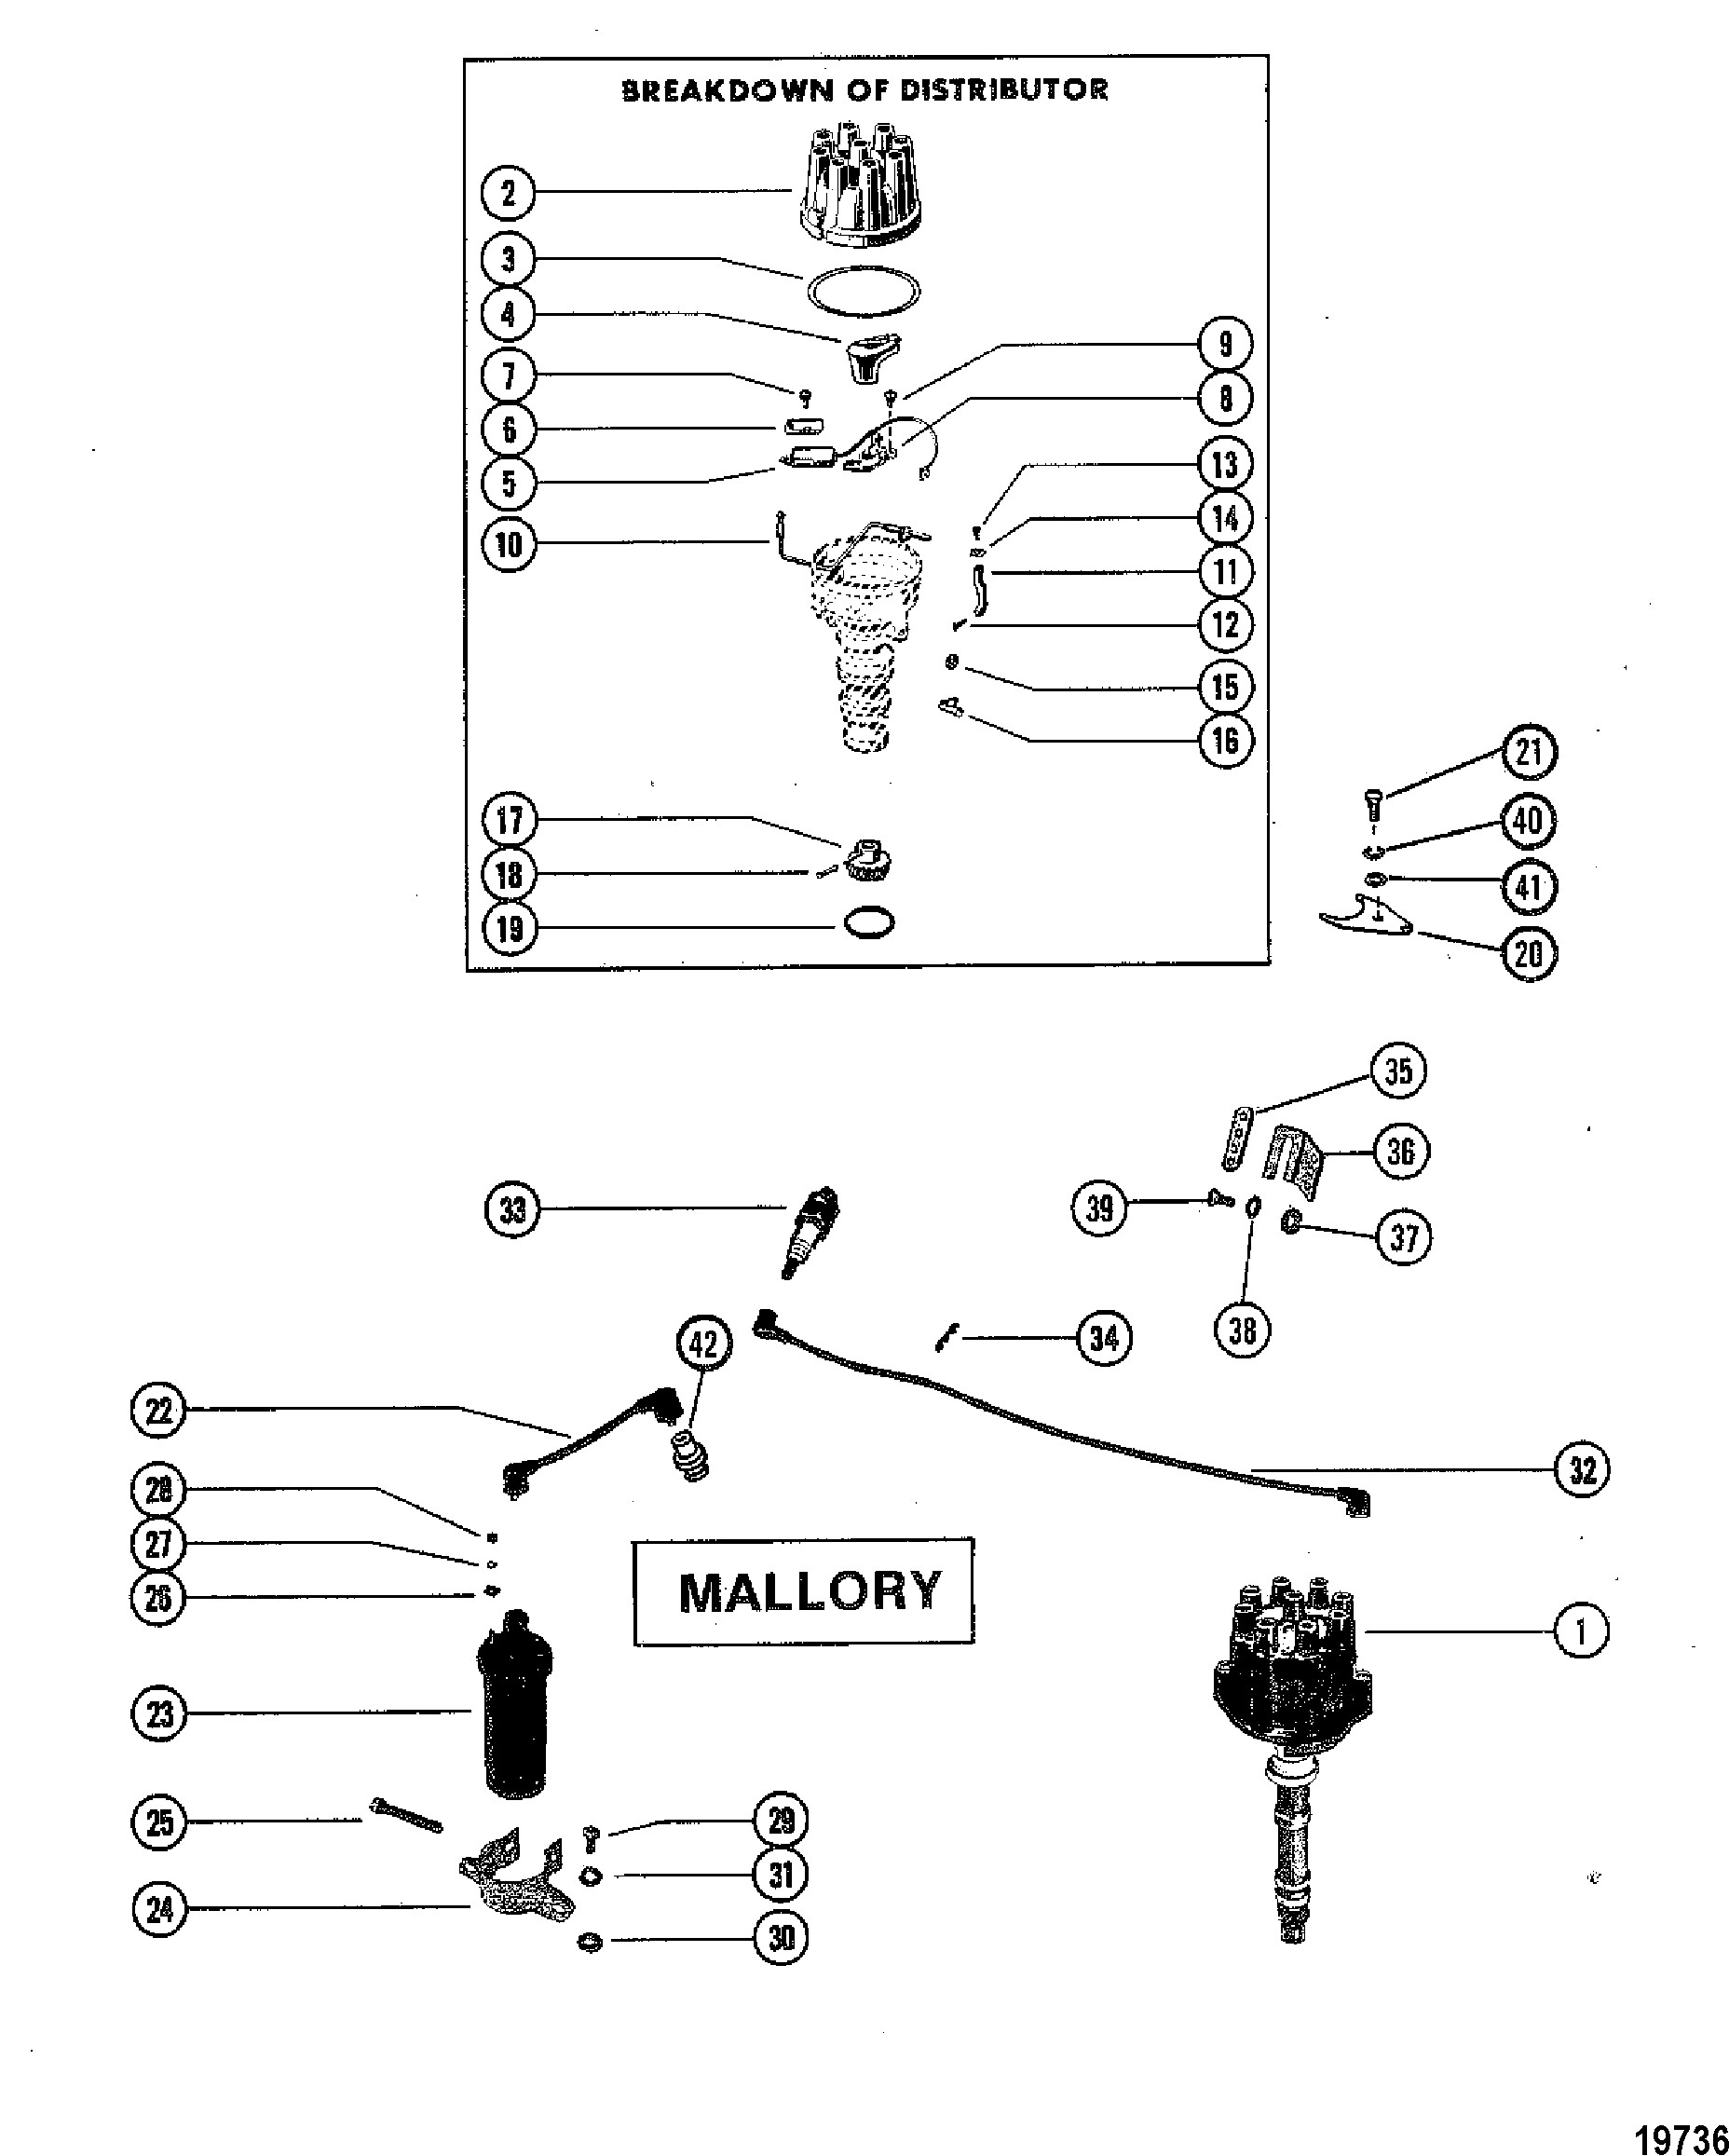 Trouble Shoot Mallory Firestorm 2a3 Mallory Hyfire Ignition Wiring Diagram Of Trouble Shoot Mallory Firestorm